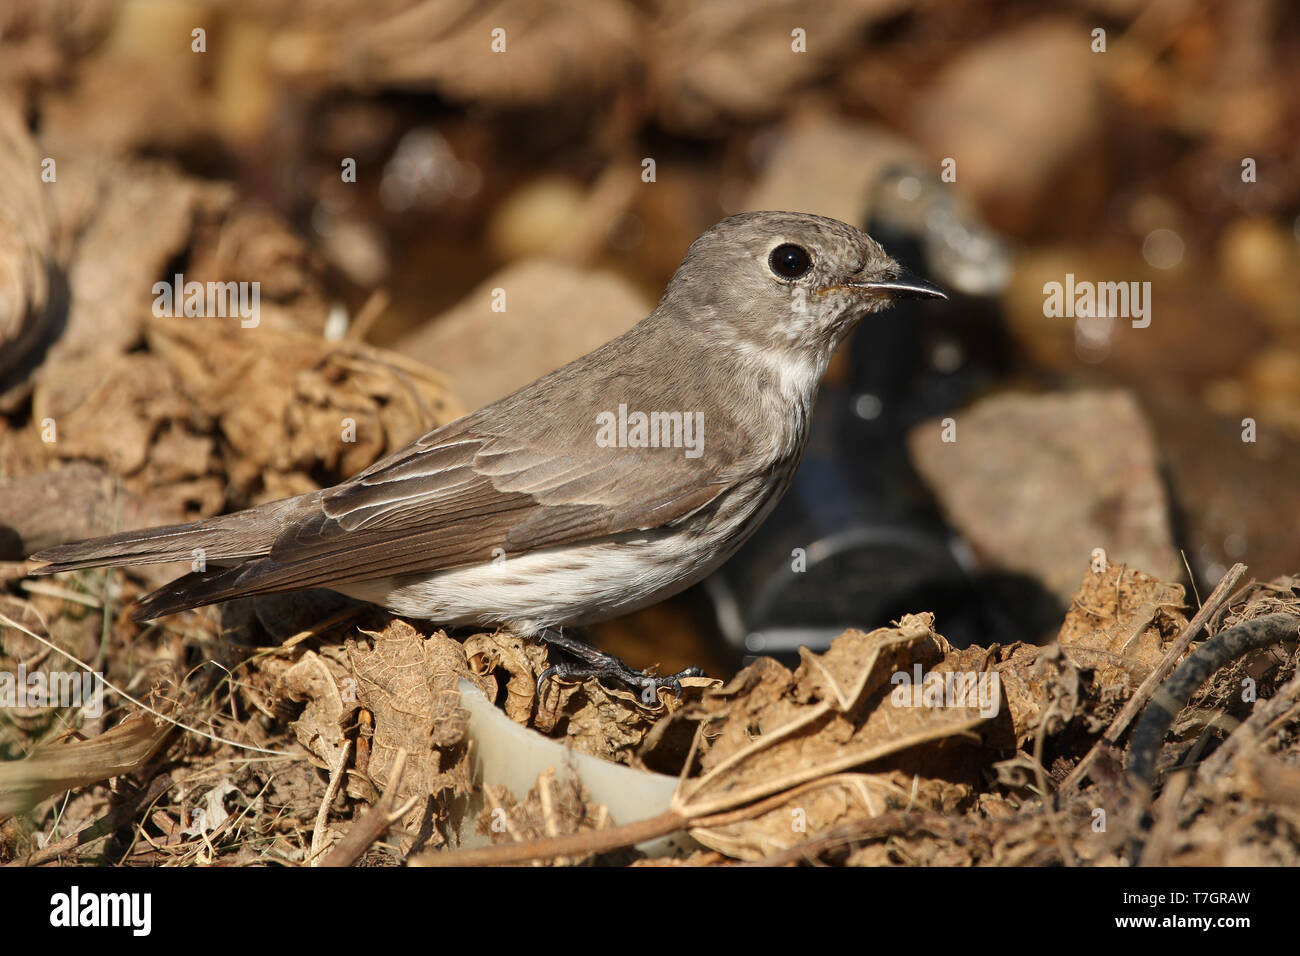 Grey-streaked Flycatcher (Muscicapa griseisticta) on Heuksan do island - South Korea. Perched on the ground. Stock Photo